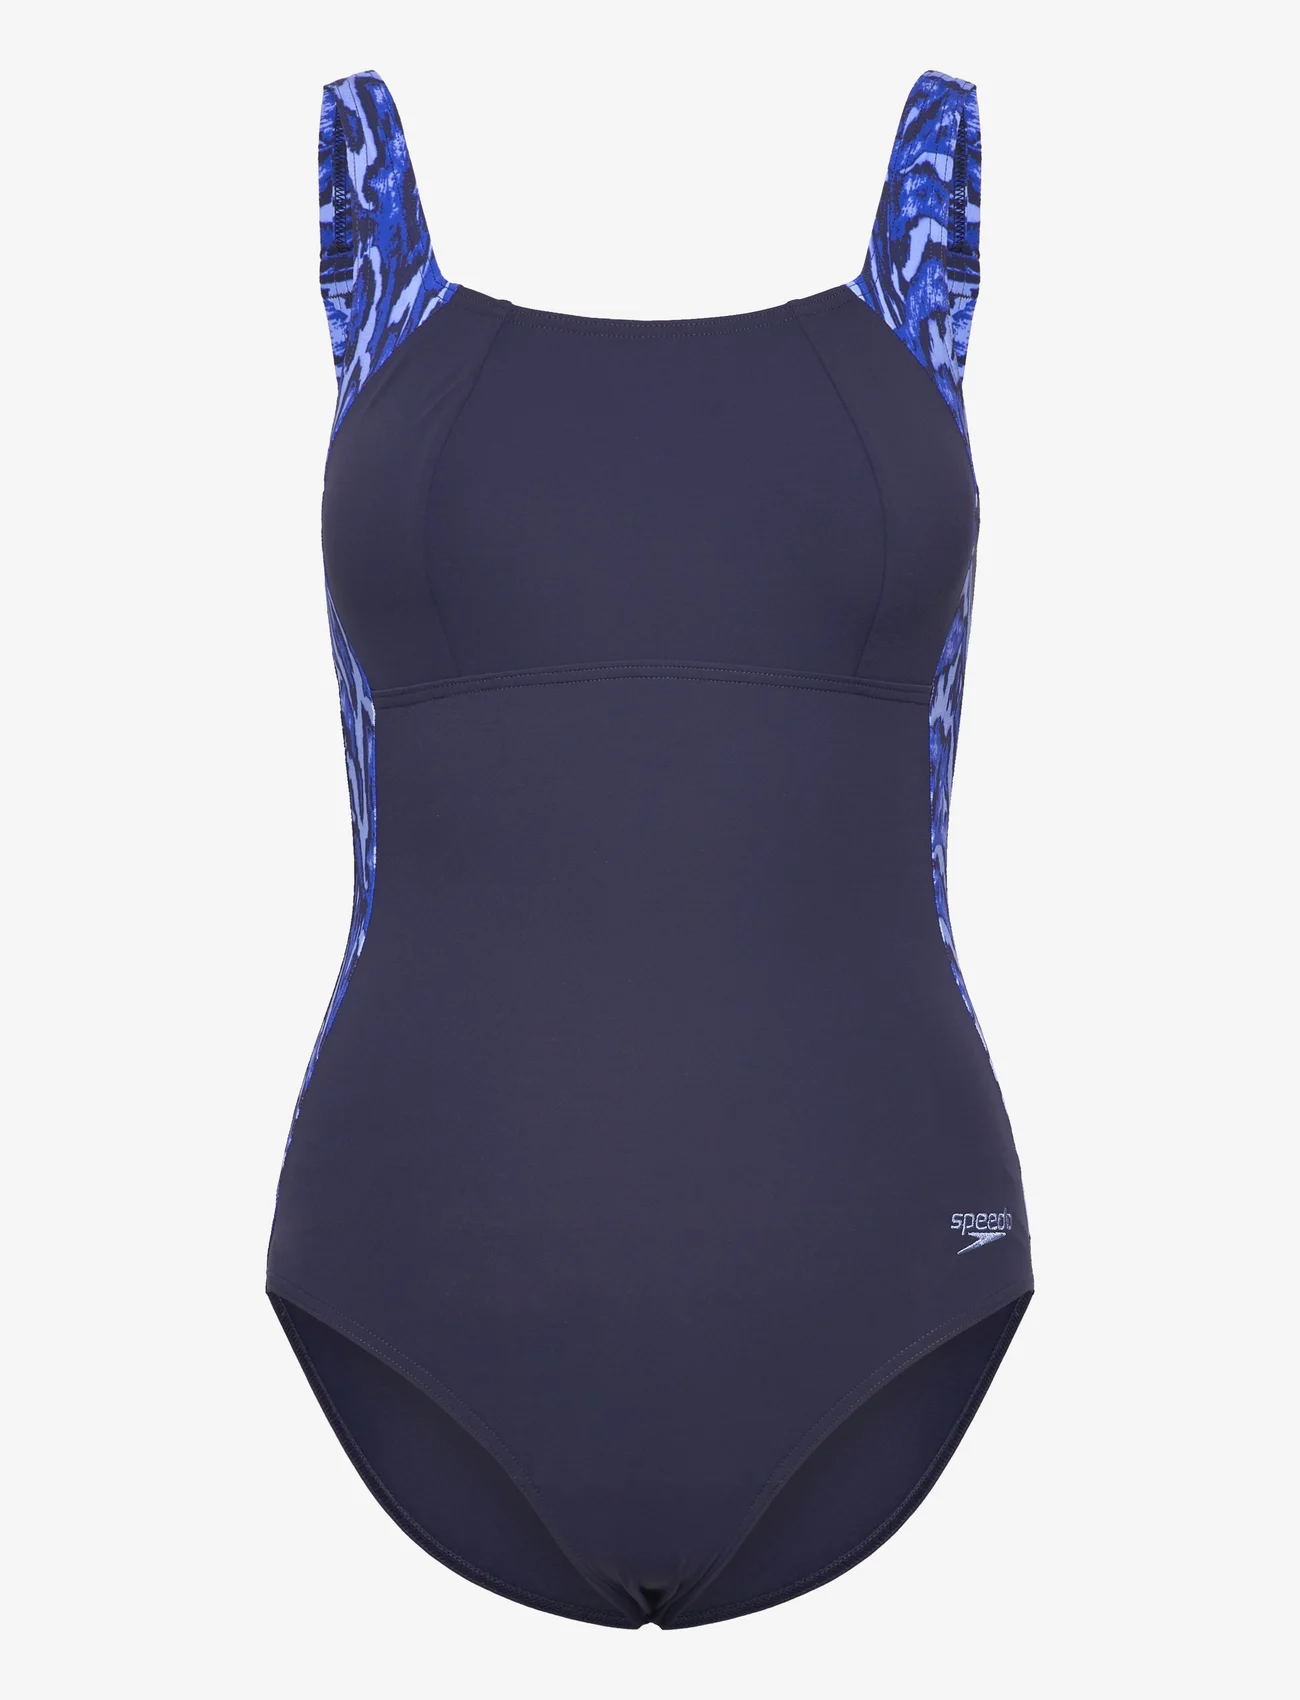 Speedo - Womens Shaping LunaLustre Printed 1 Piece - swimsuits - navy/blue - 0